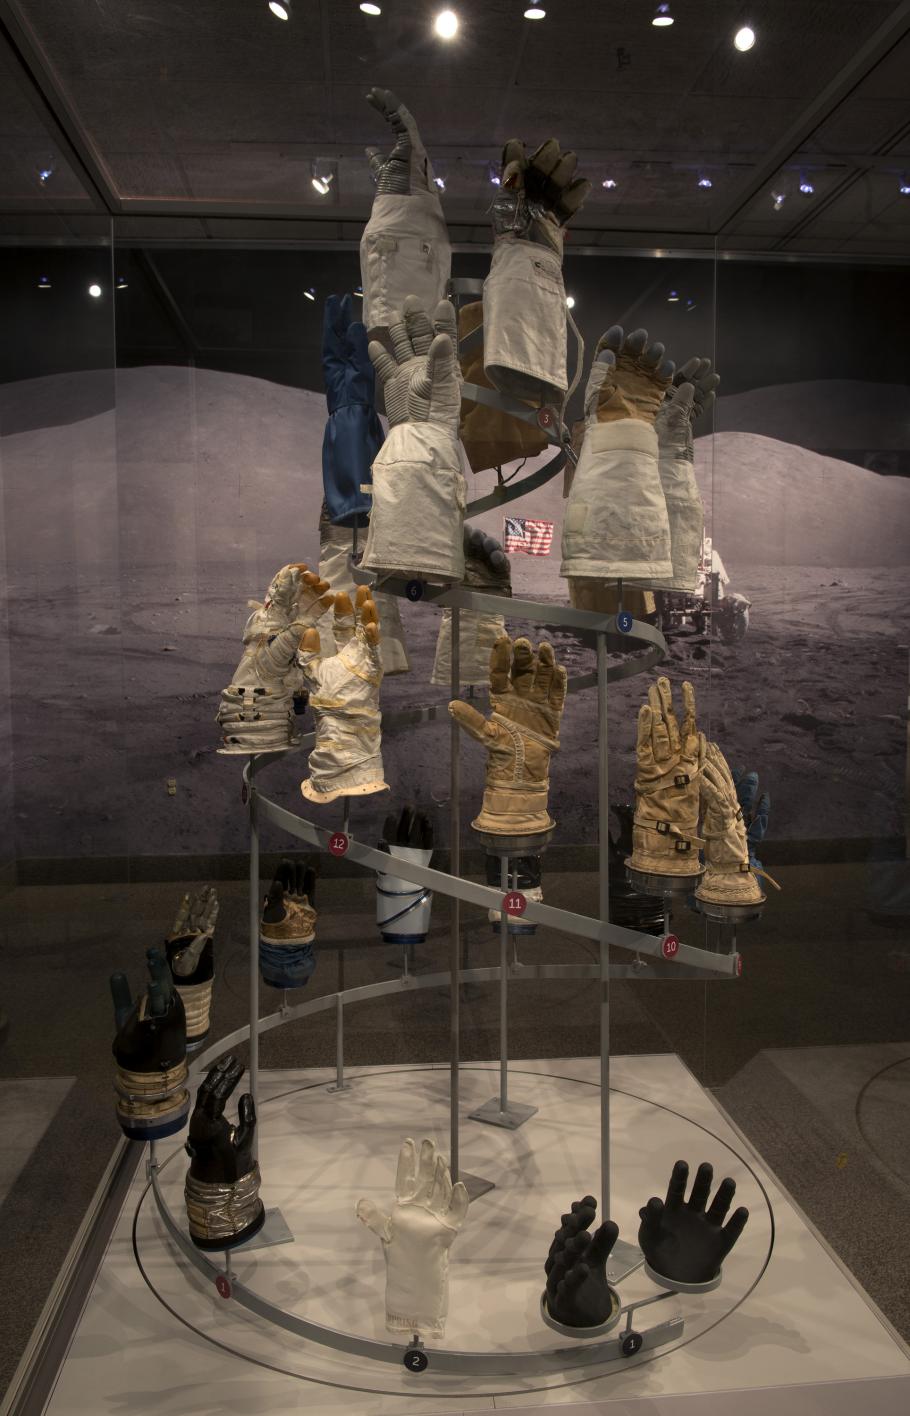 Glove Display in \"Outside the Spacecraft\"